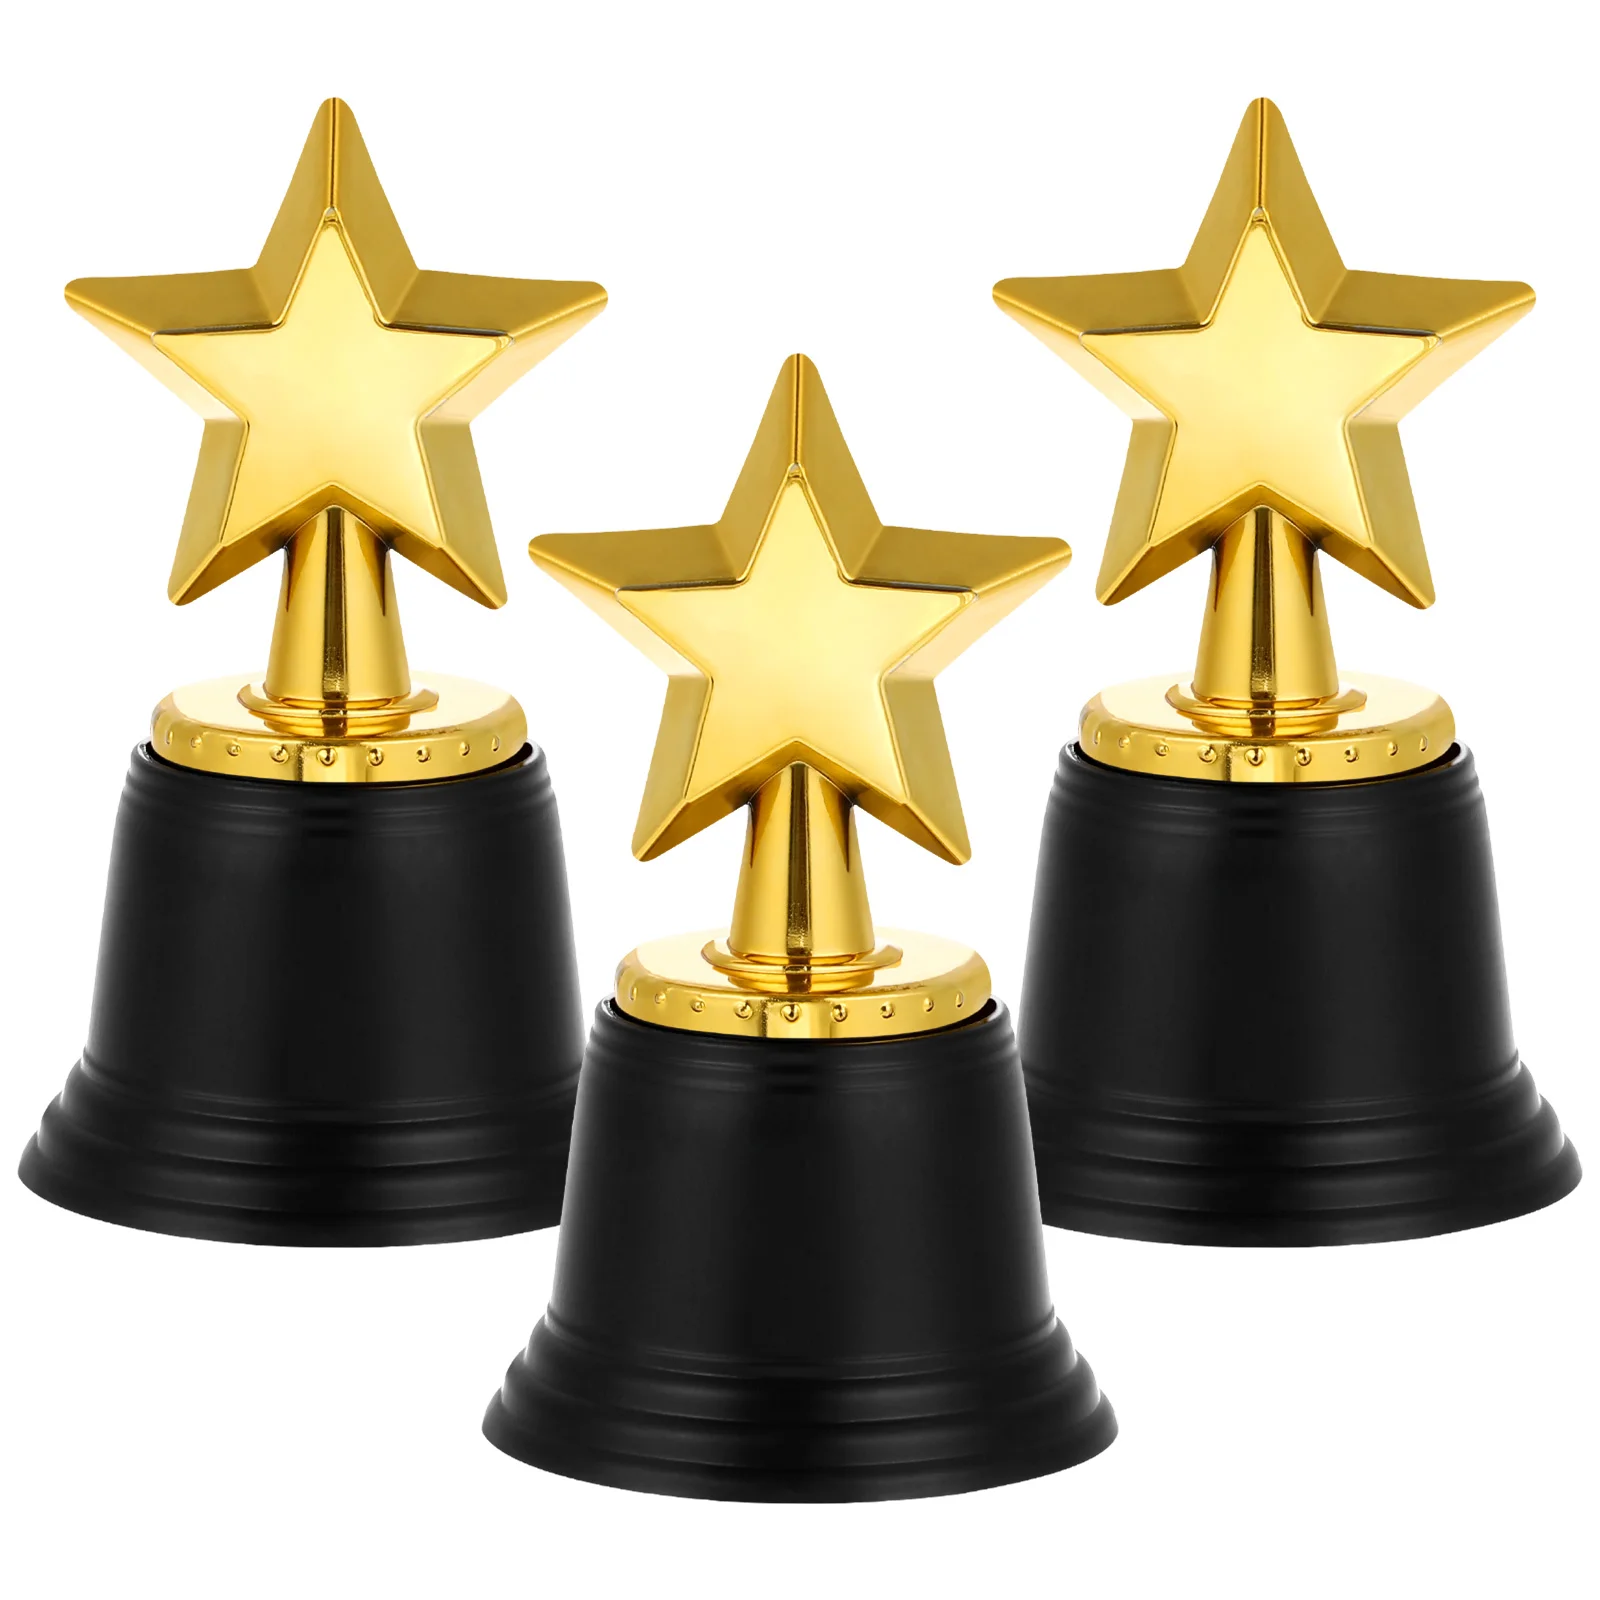 

Dazzling Star Game Personal Party Trophies Plastic Trophies Plastic Trophies Reward Prizes Reward Trophies Medals Children